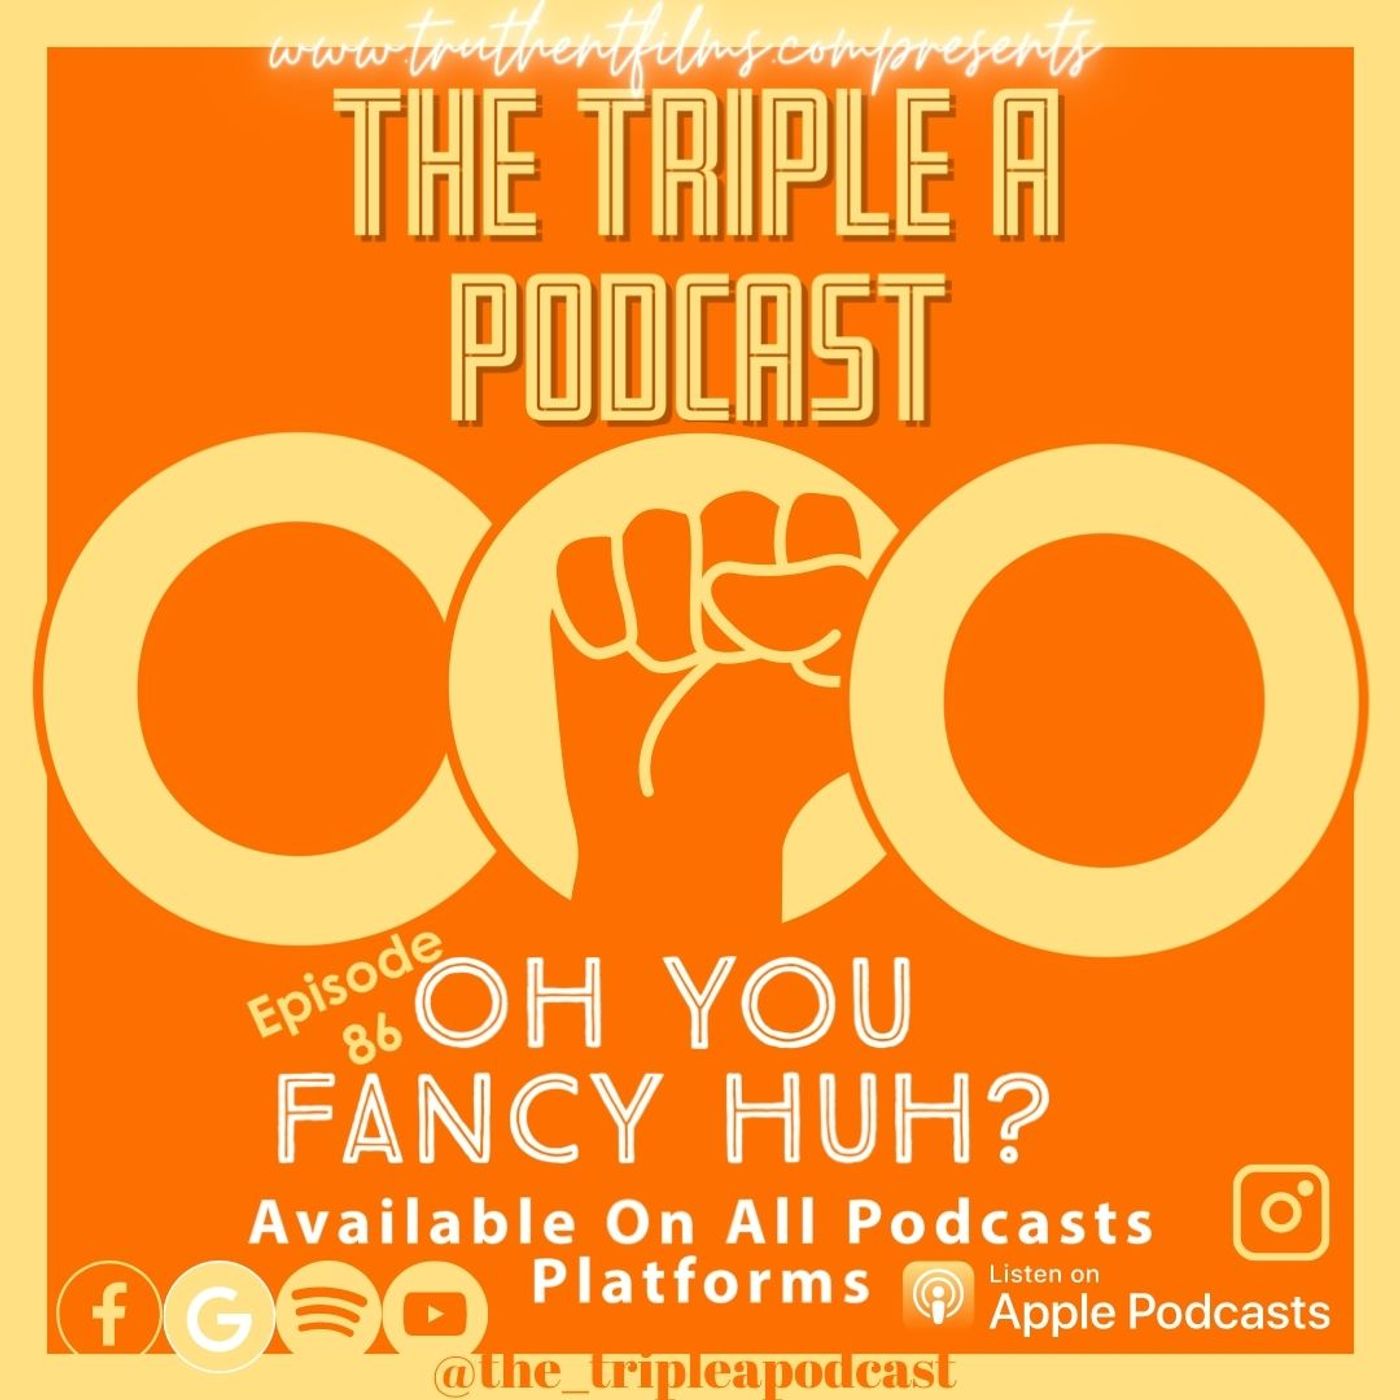 The Triple A Podcast - EP 86 "Oh You Fancy Huh?"